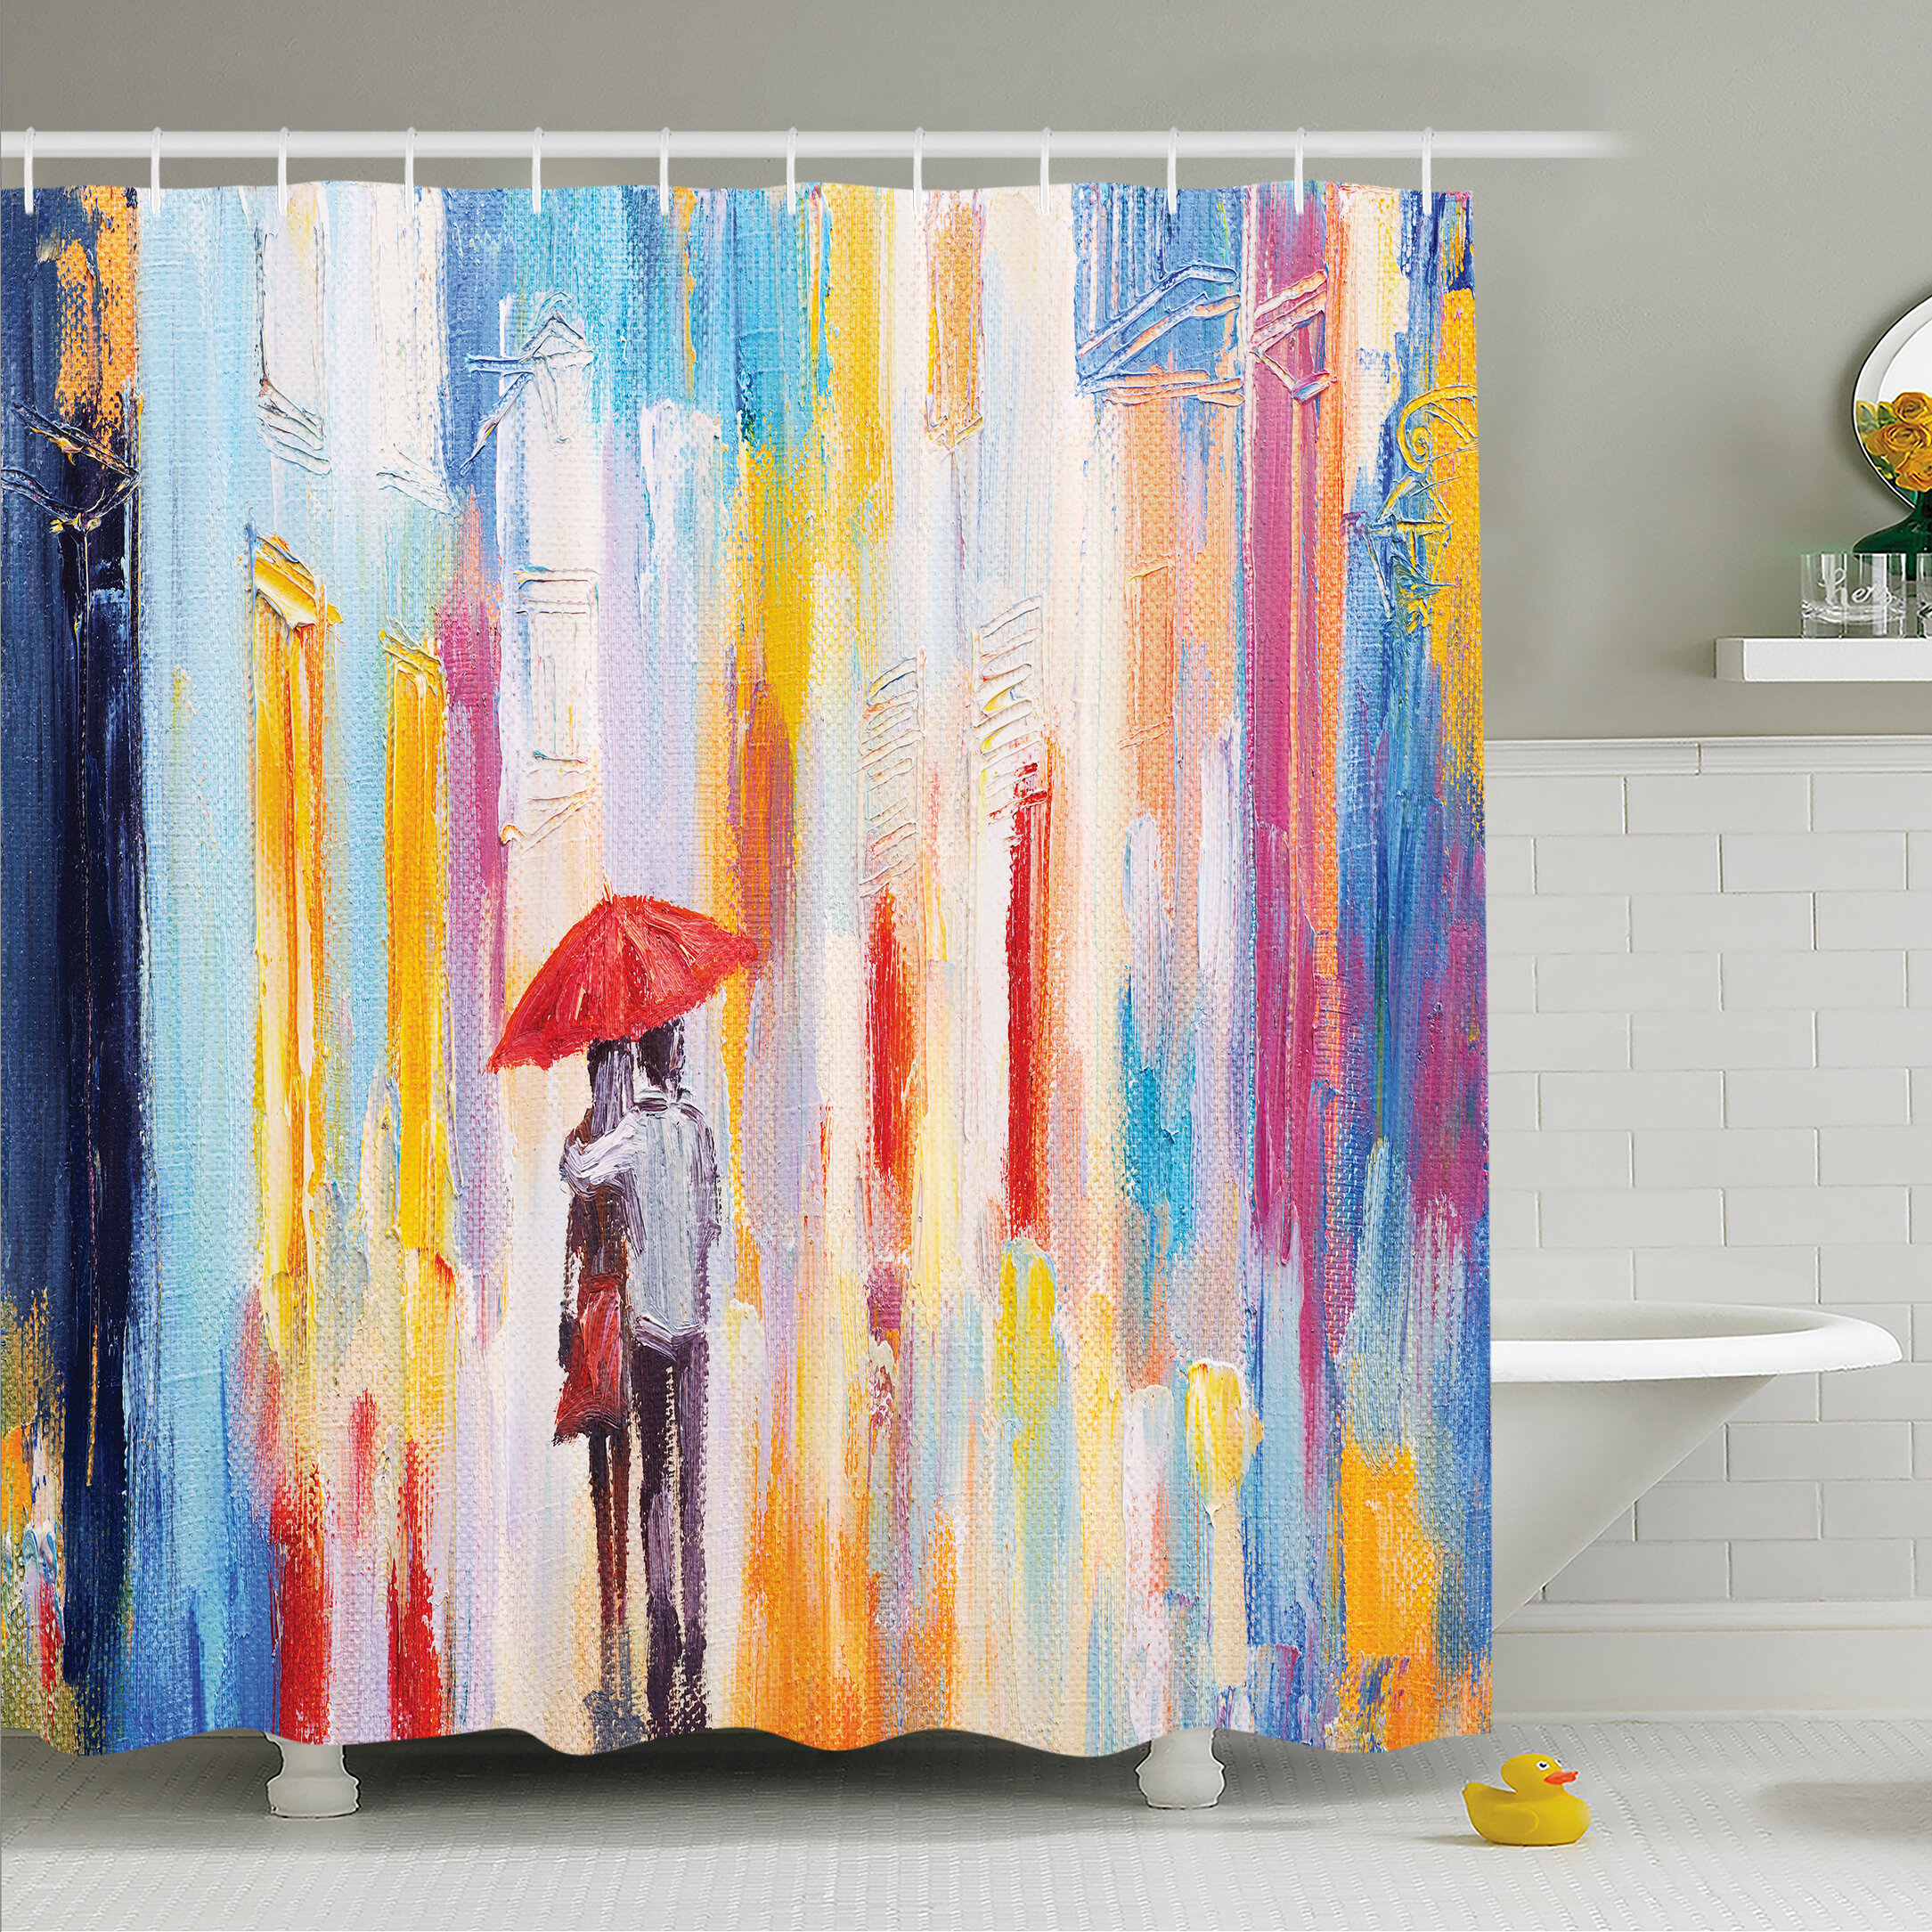 Peacock Shower Curtain Set + Hooks East Urban Home Size: 69 H x 105 W